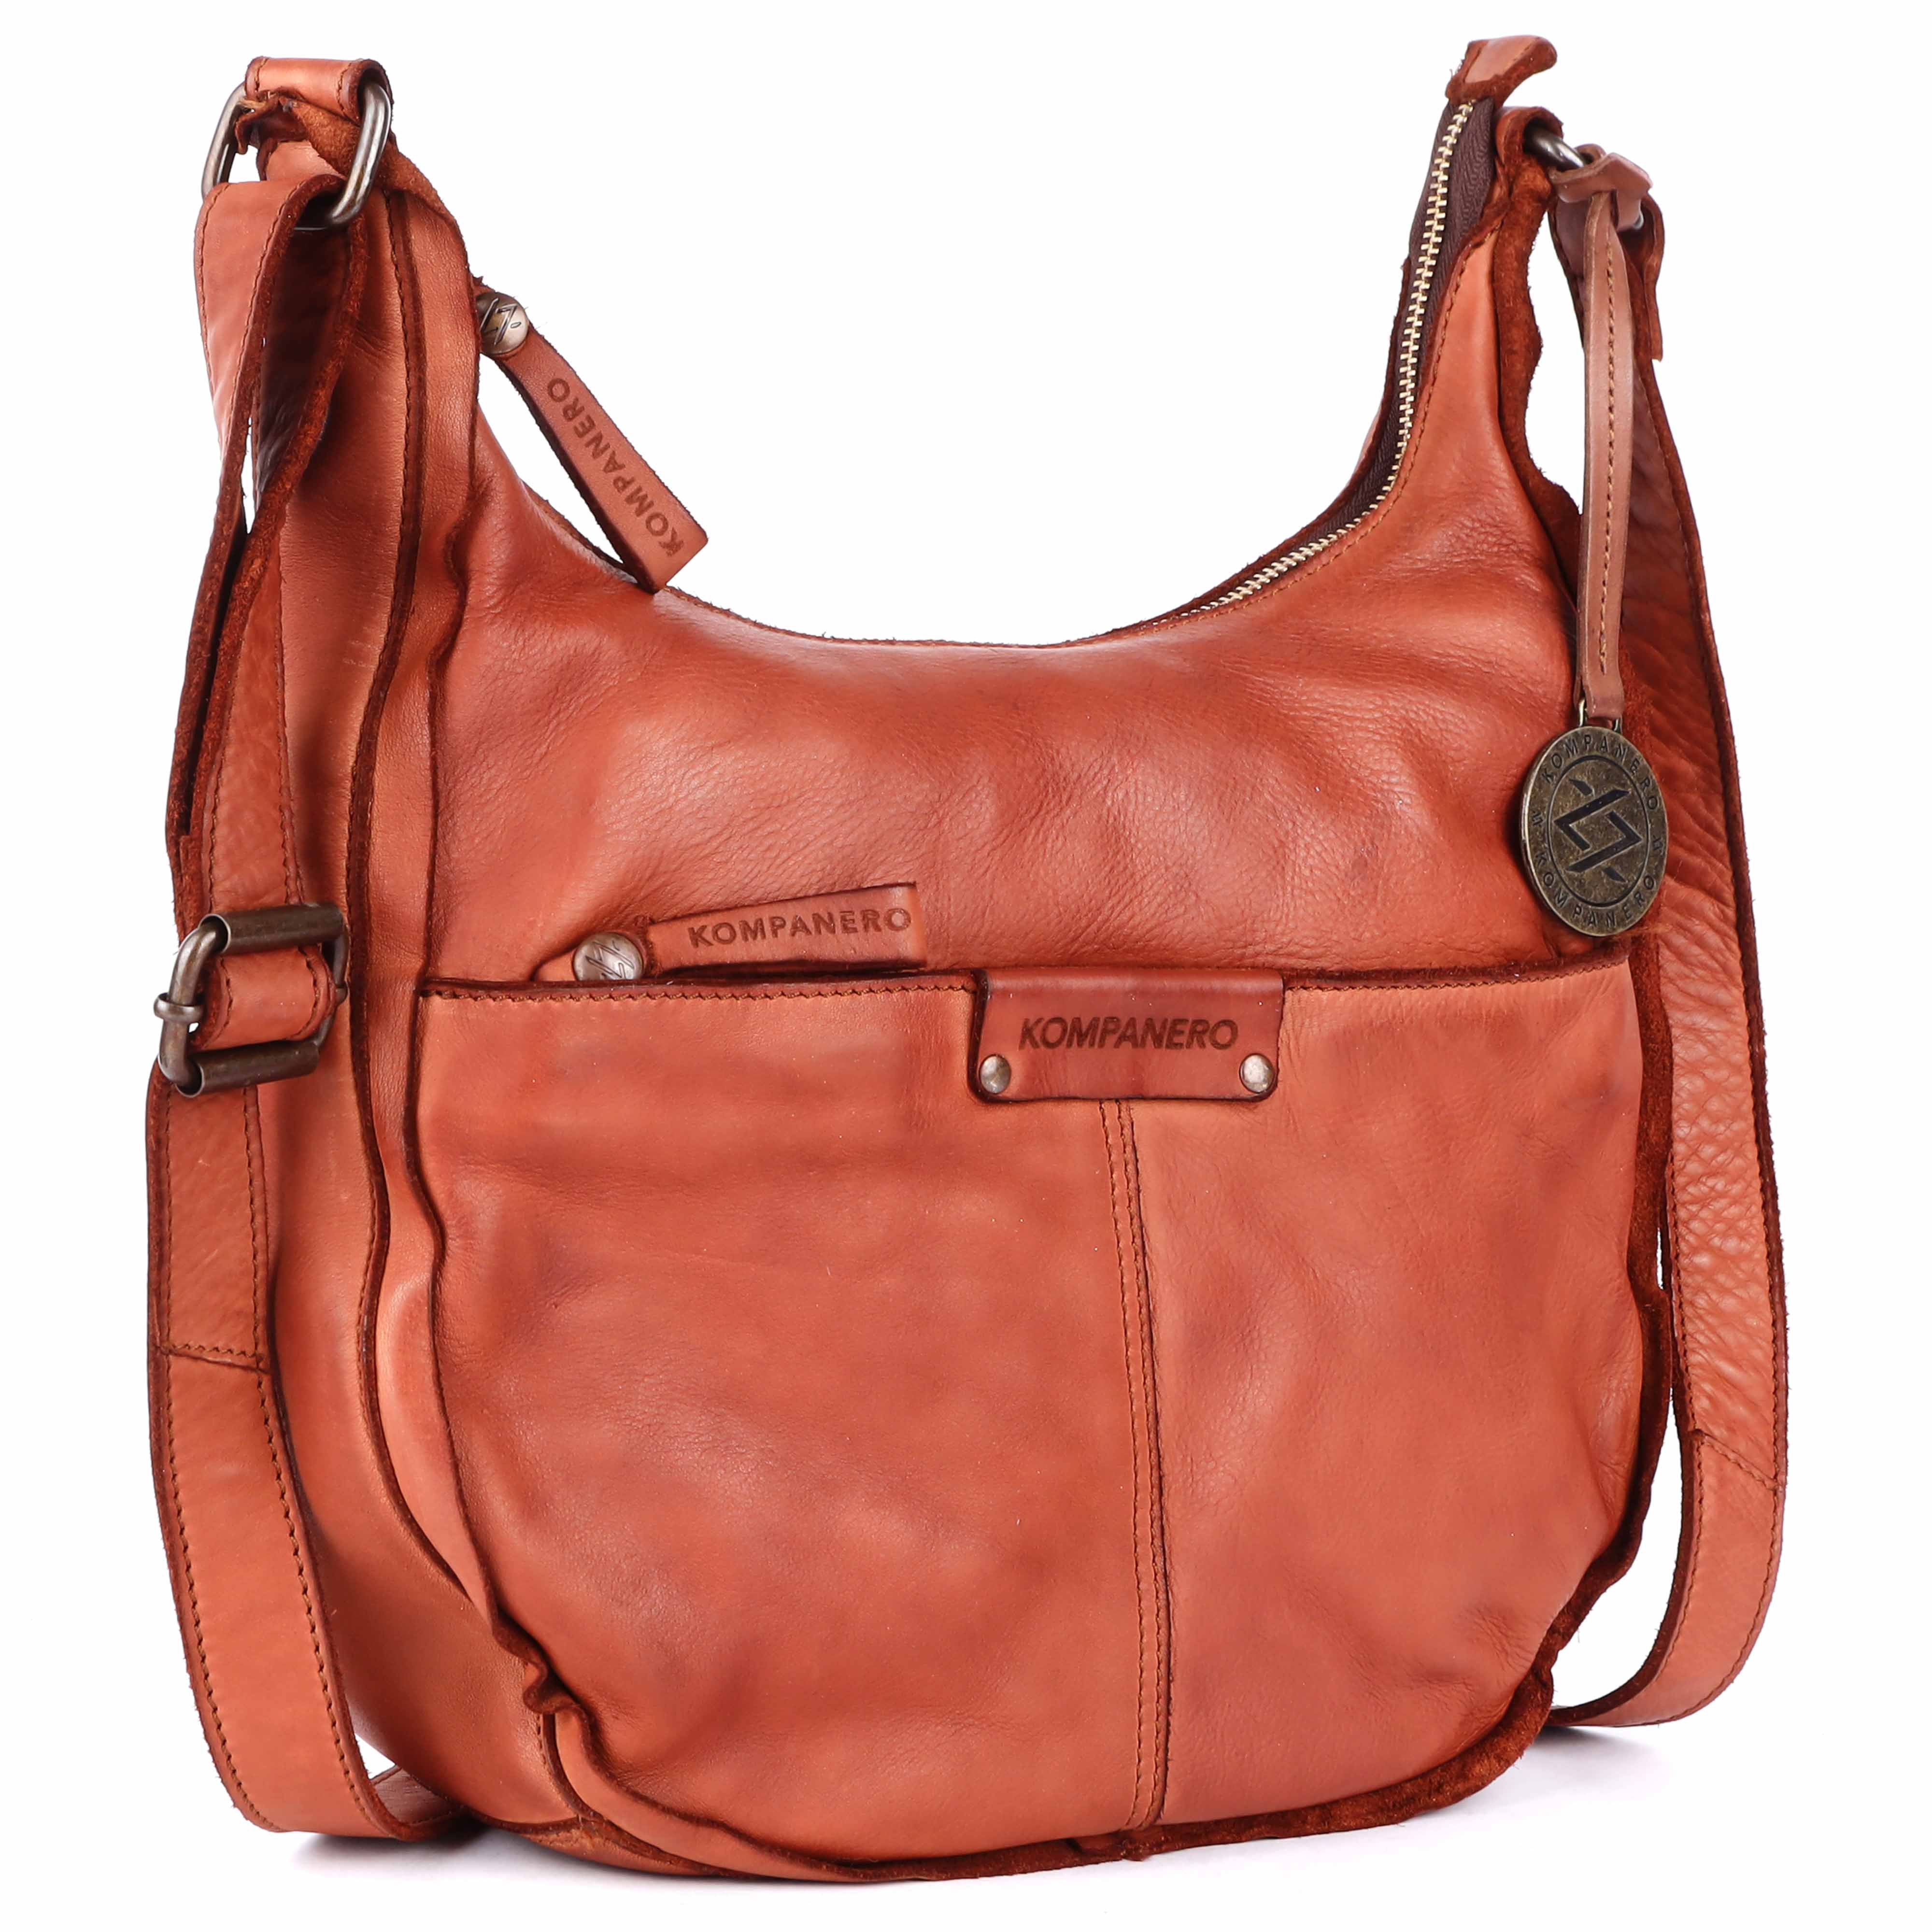 Givenchy Medium G-lock Leather Hobo Bag in Natural | Lyst